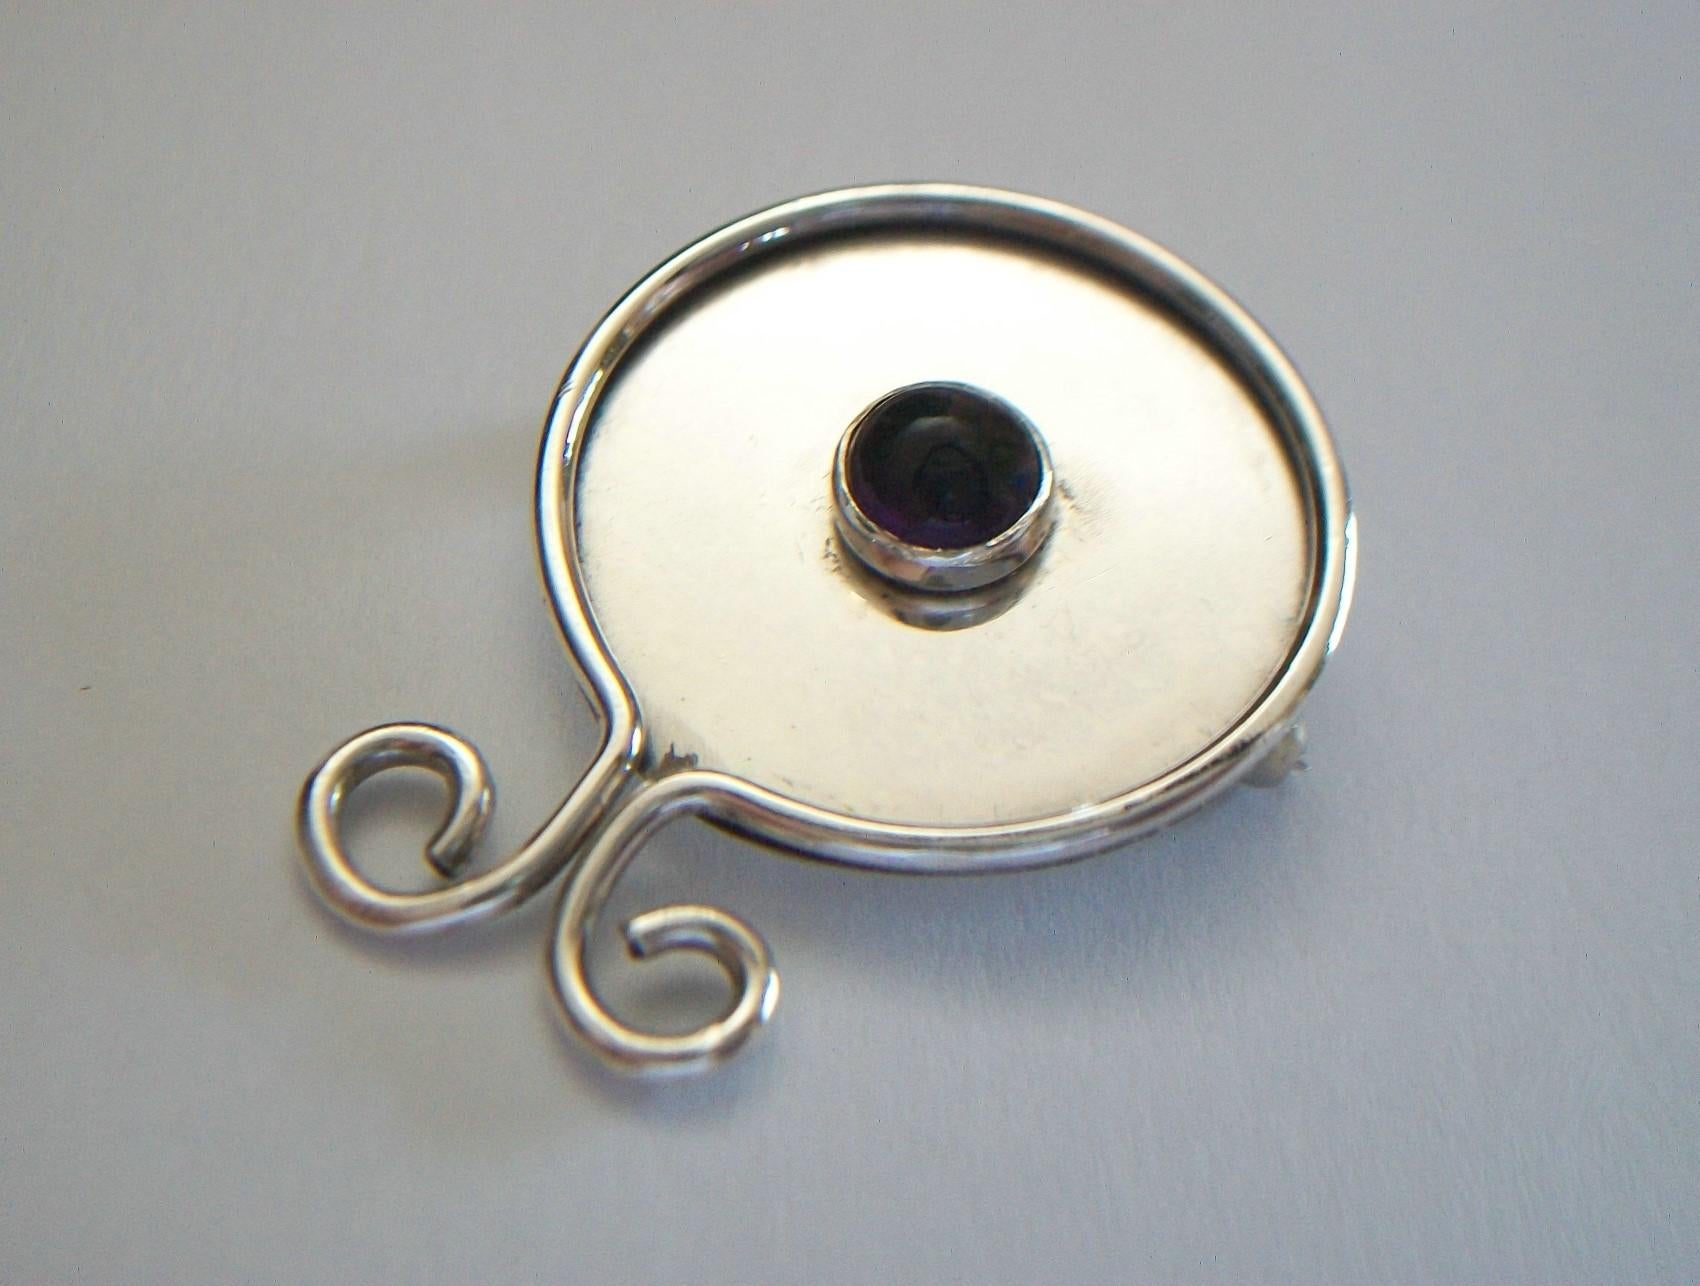 Modernist White Metal and Round Cabochon Amethyst Brooch, Unsigned, circa 1980s For Sale 2